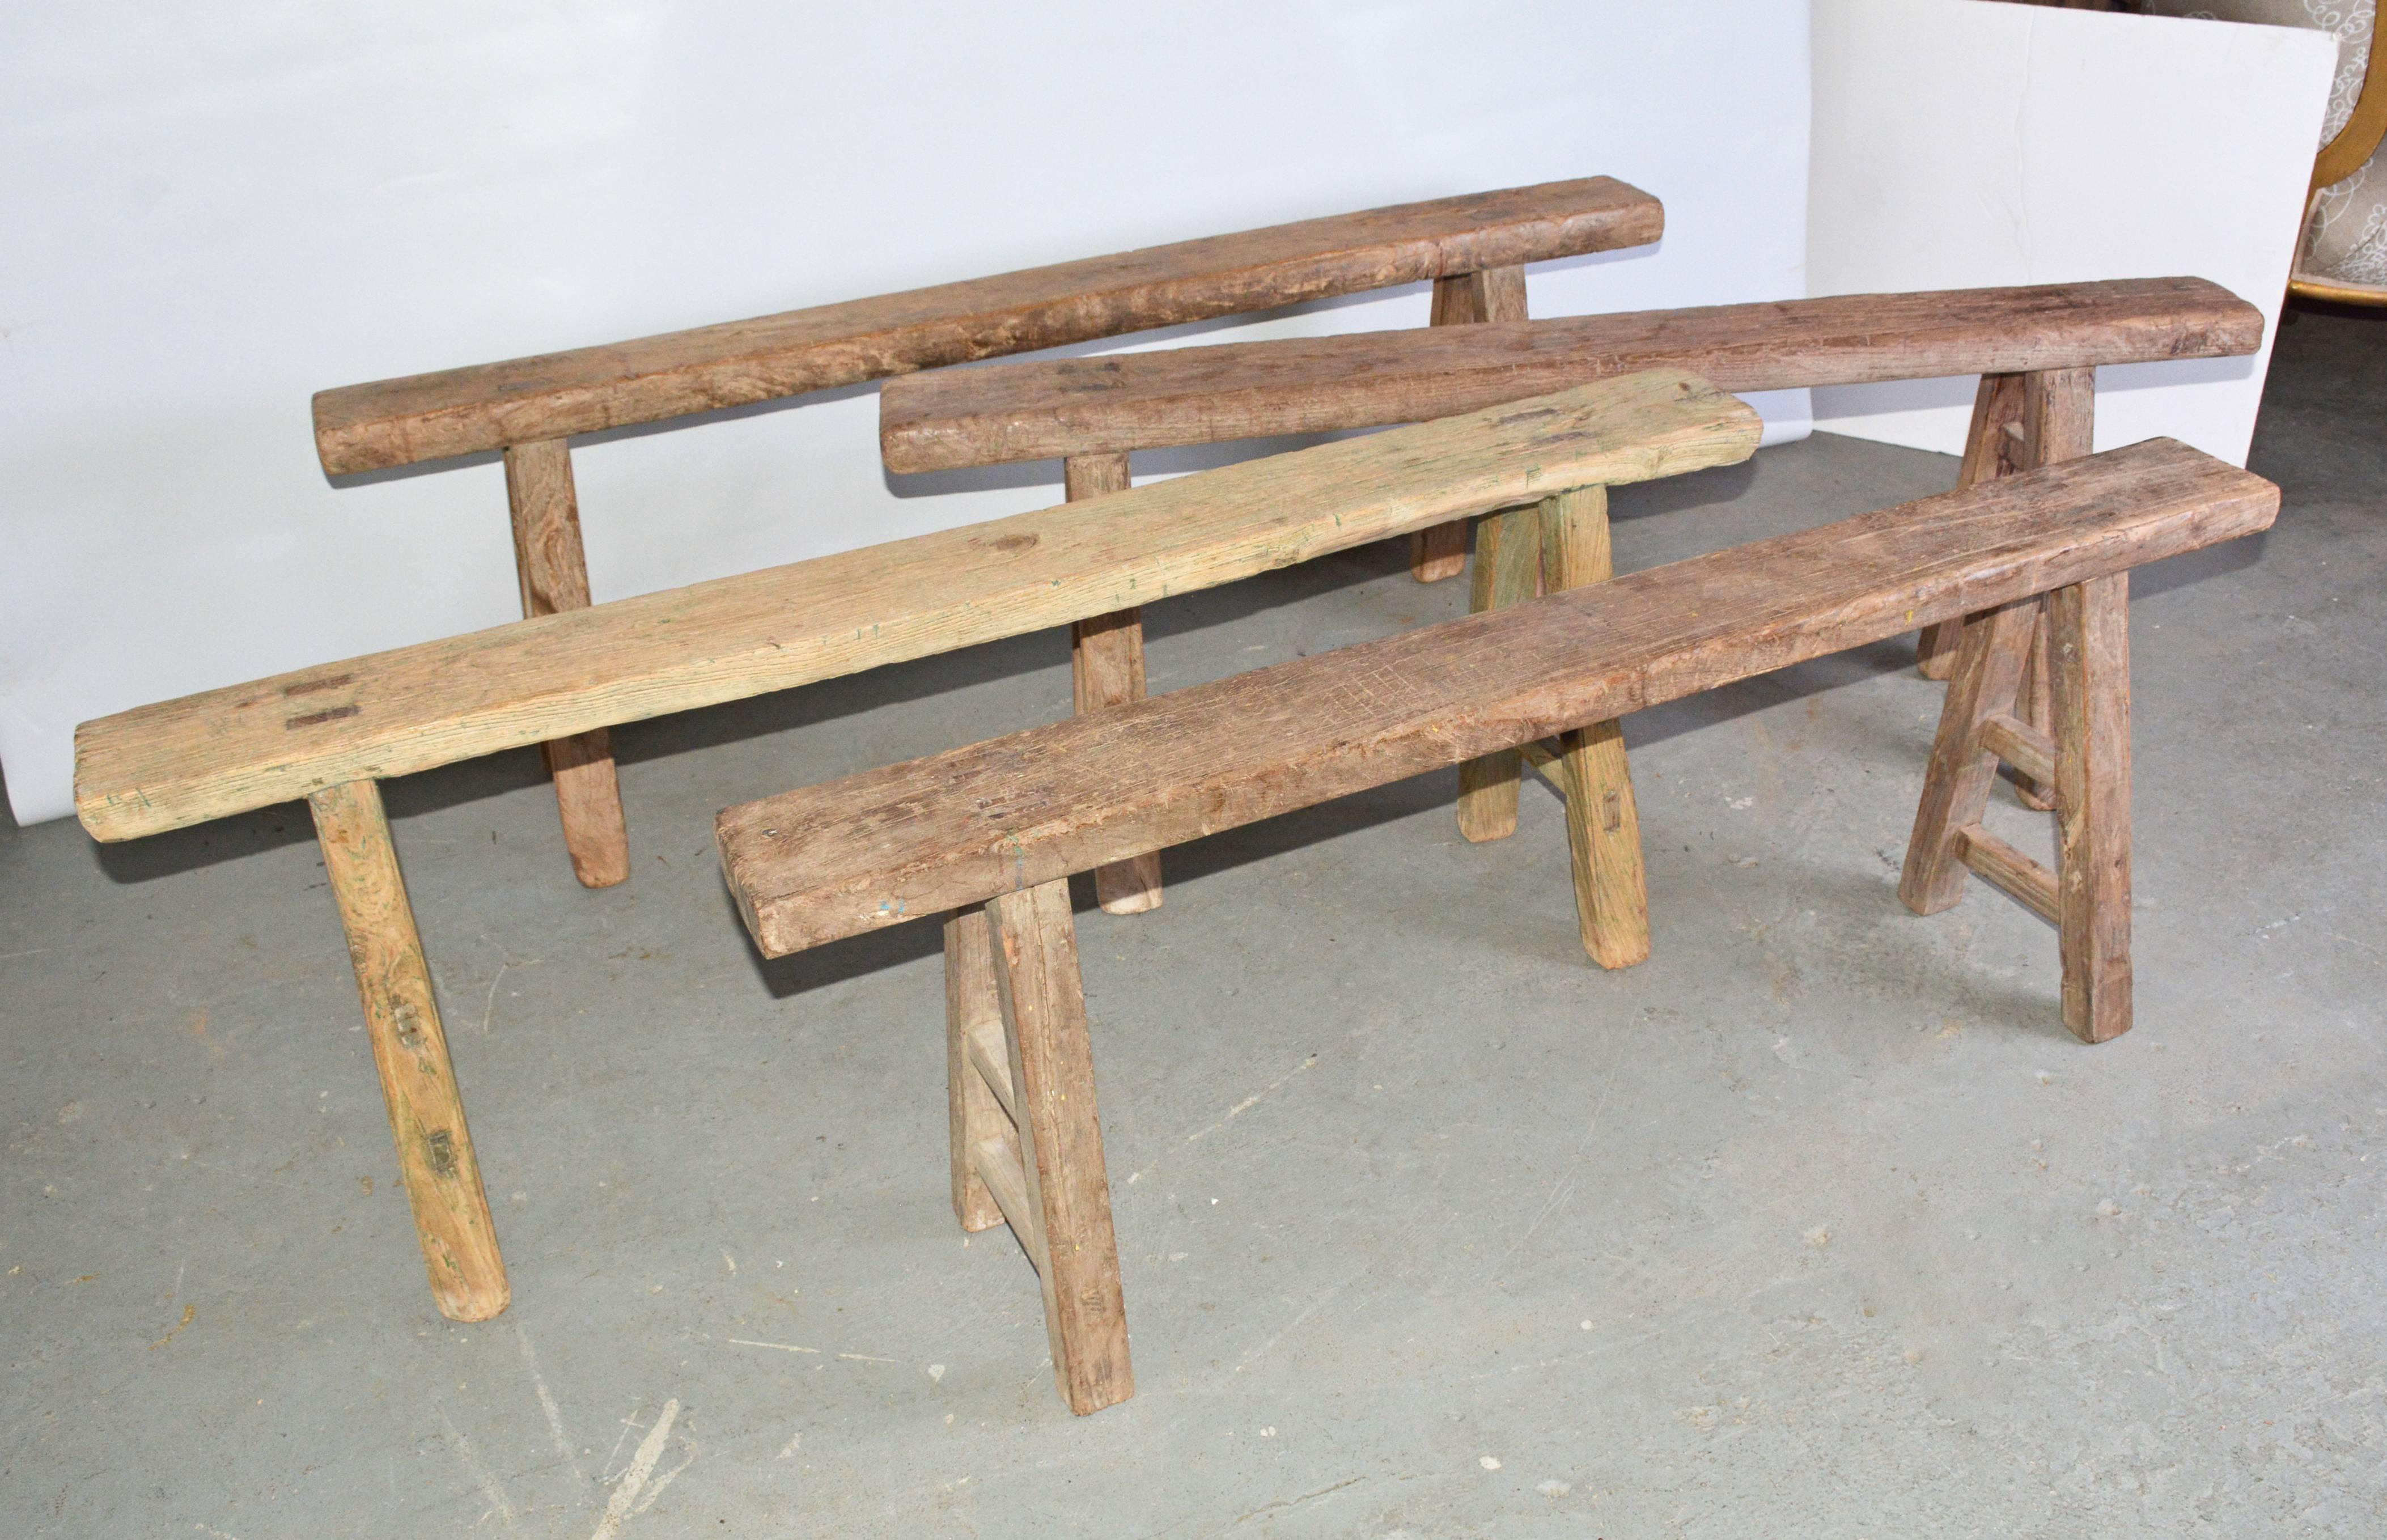 The four antique Chinese benches have splayed legs pegged into each seat. The legs are secured with double stretchers also pegged. Each slightly different. Can be used as dining seating or porch or picnic casual dining.
Bench #1:   seat area -- 54 x